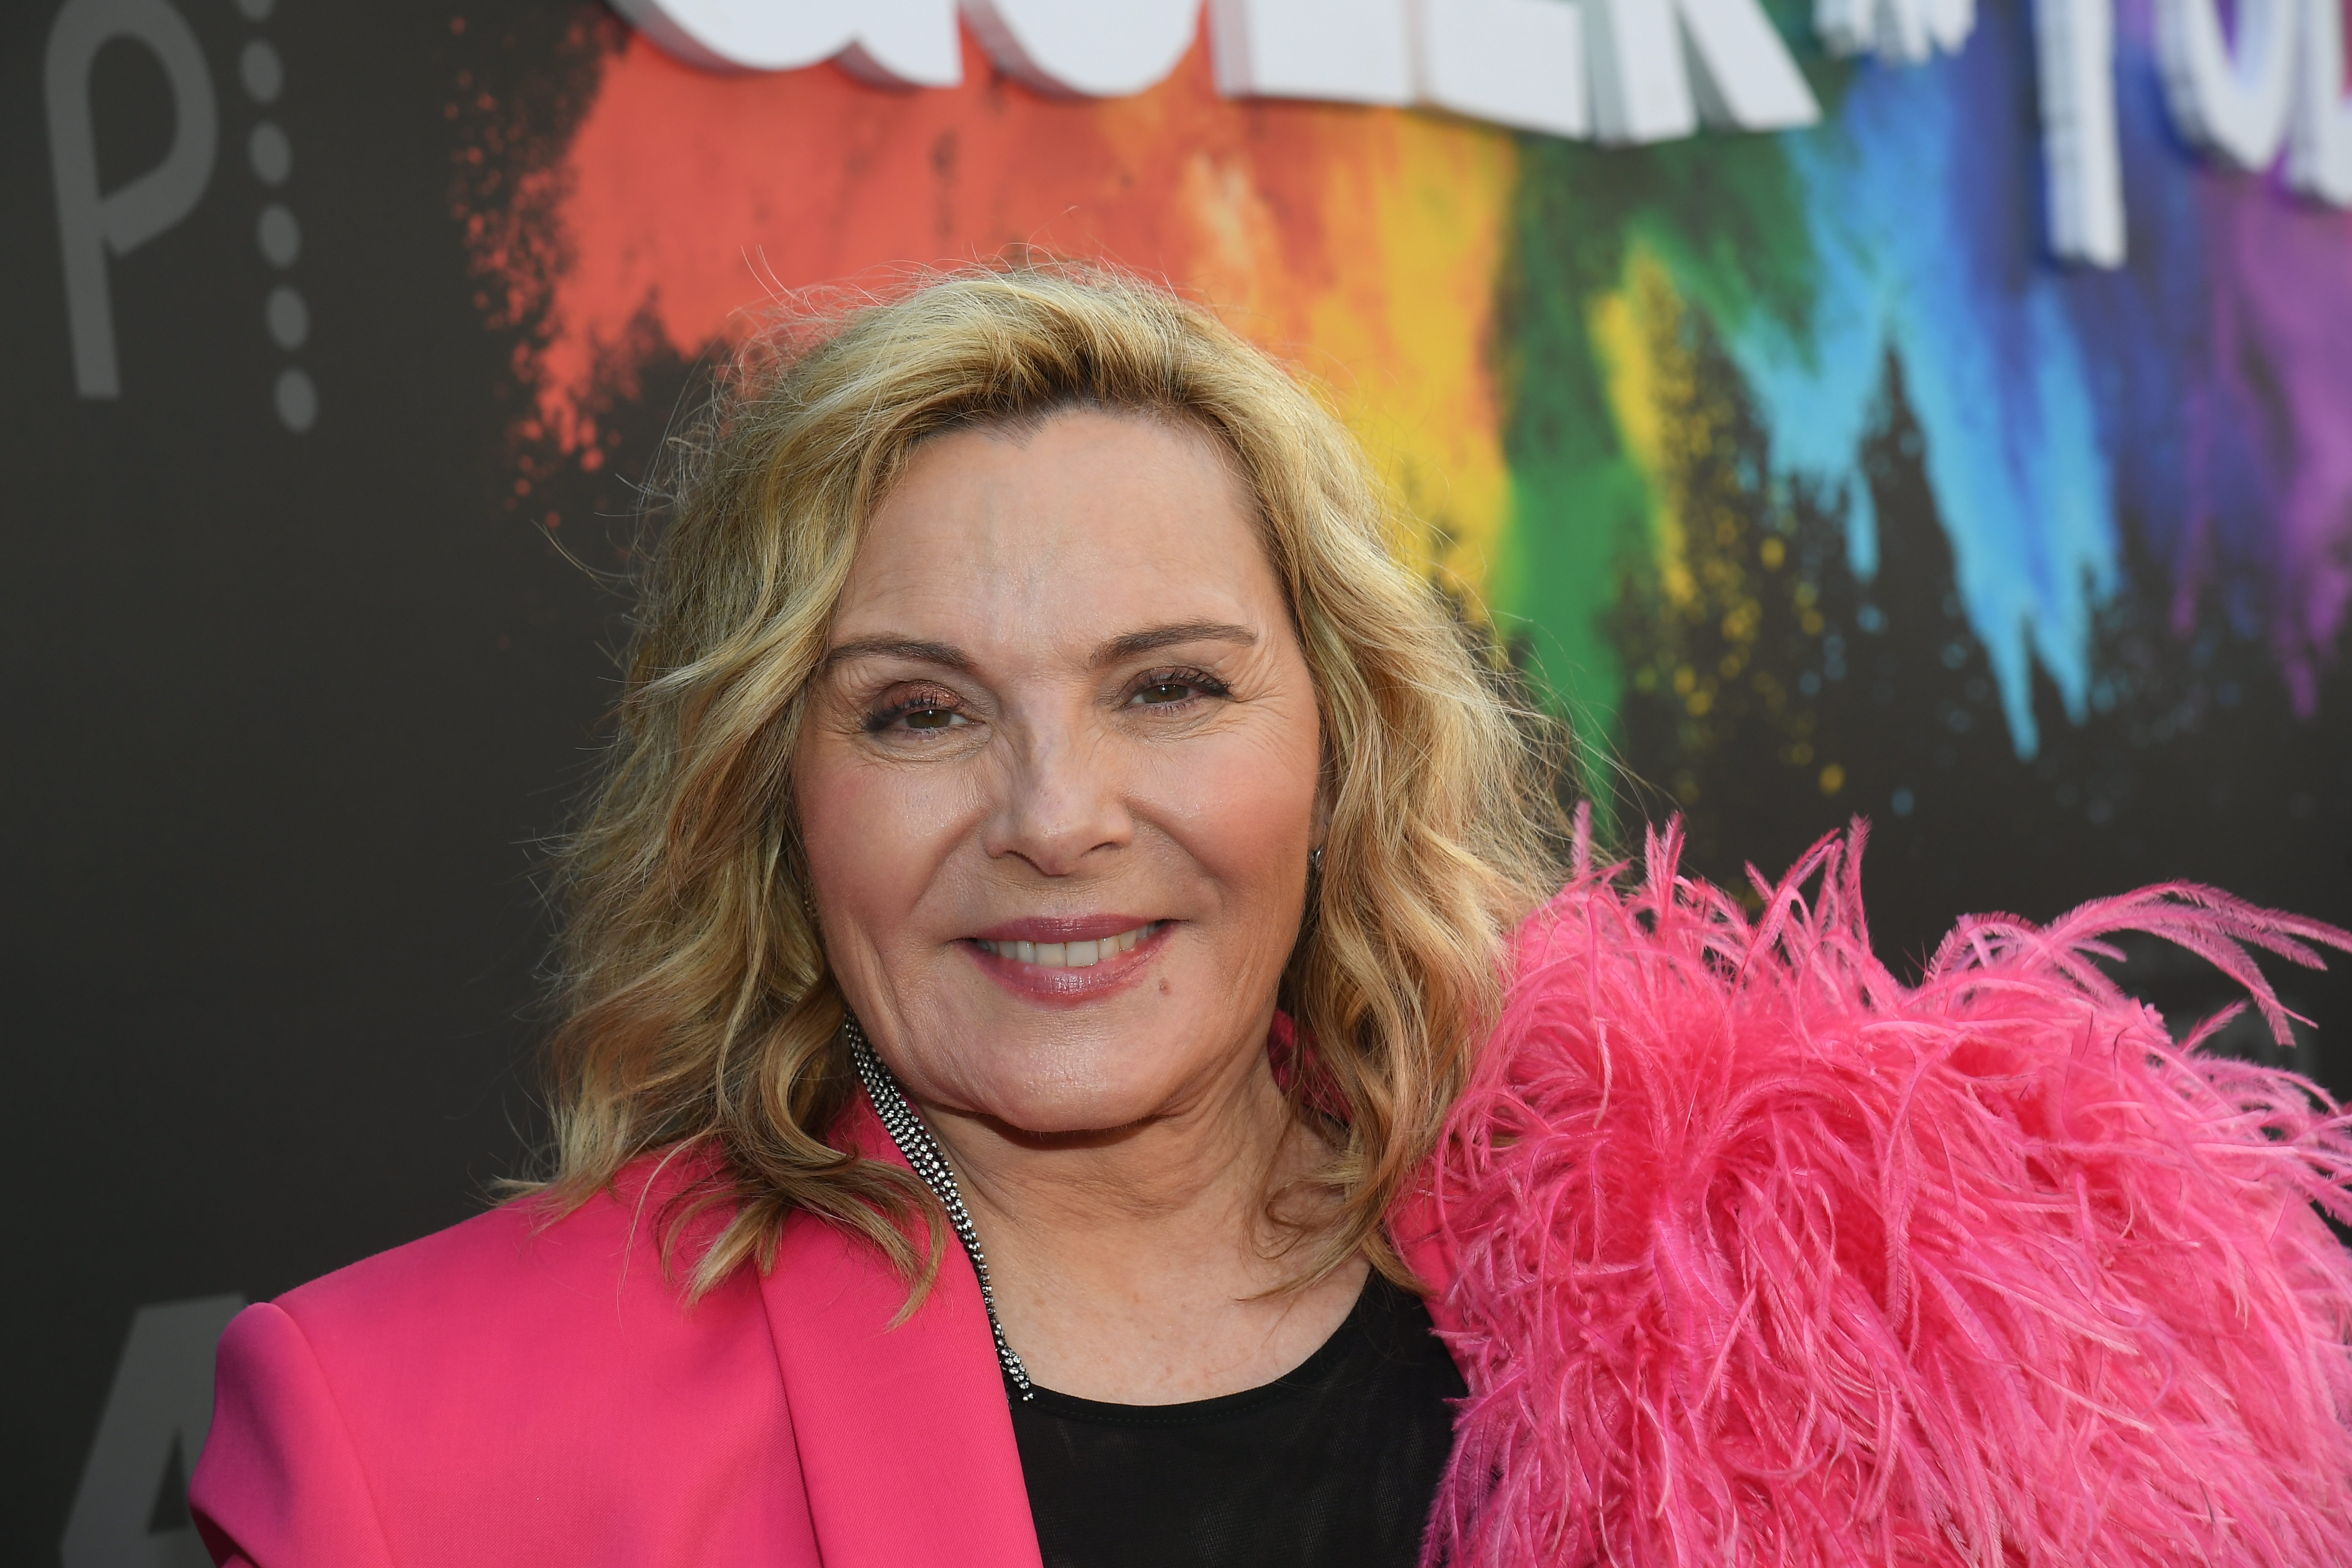 Kim Cattrall at Peacock's "Queer As Folk" world premiere event in partnership with Outfest's OutFronts Festival on June 3, 2023 | Source: Getty Images